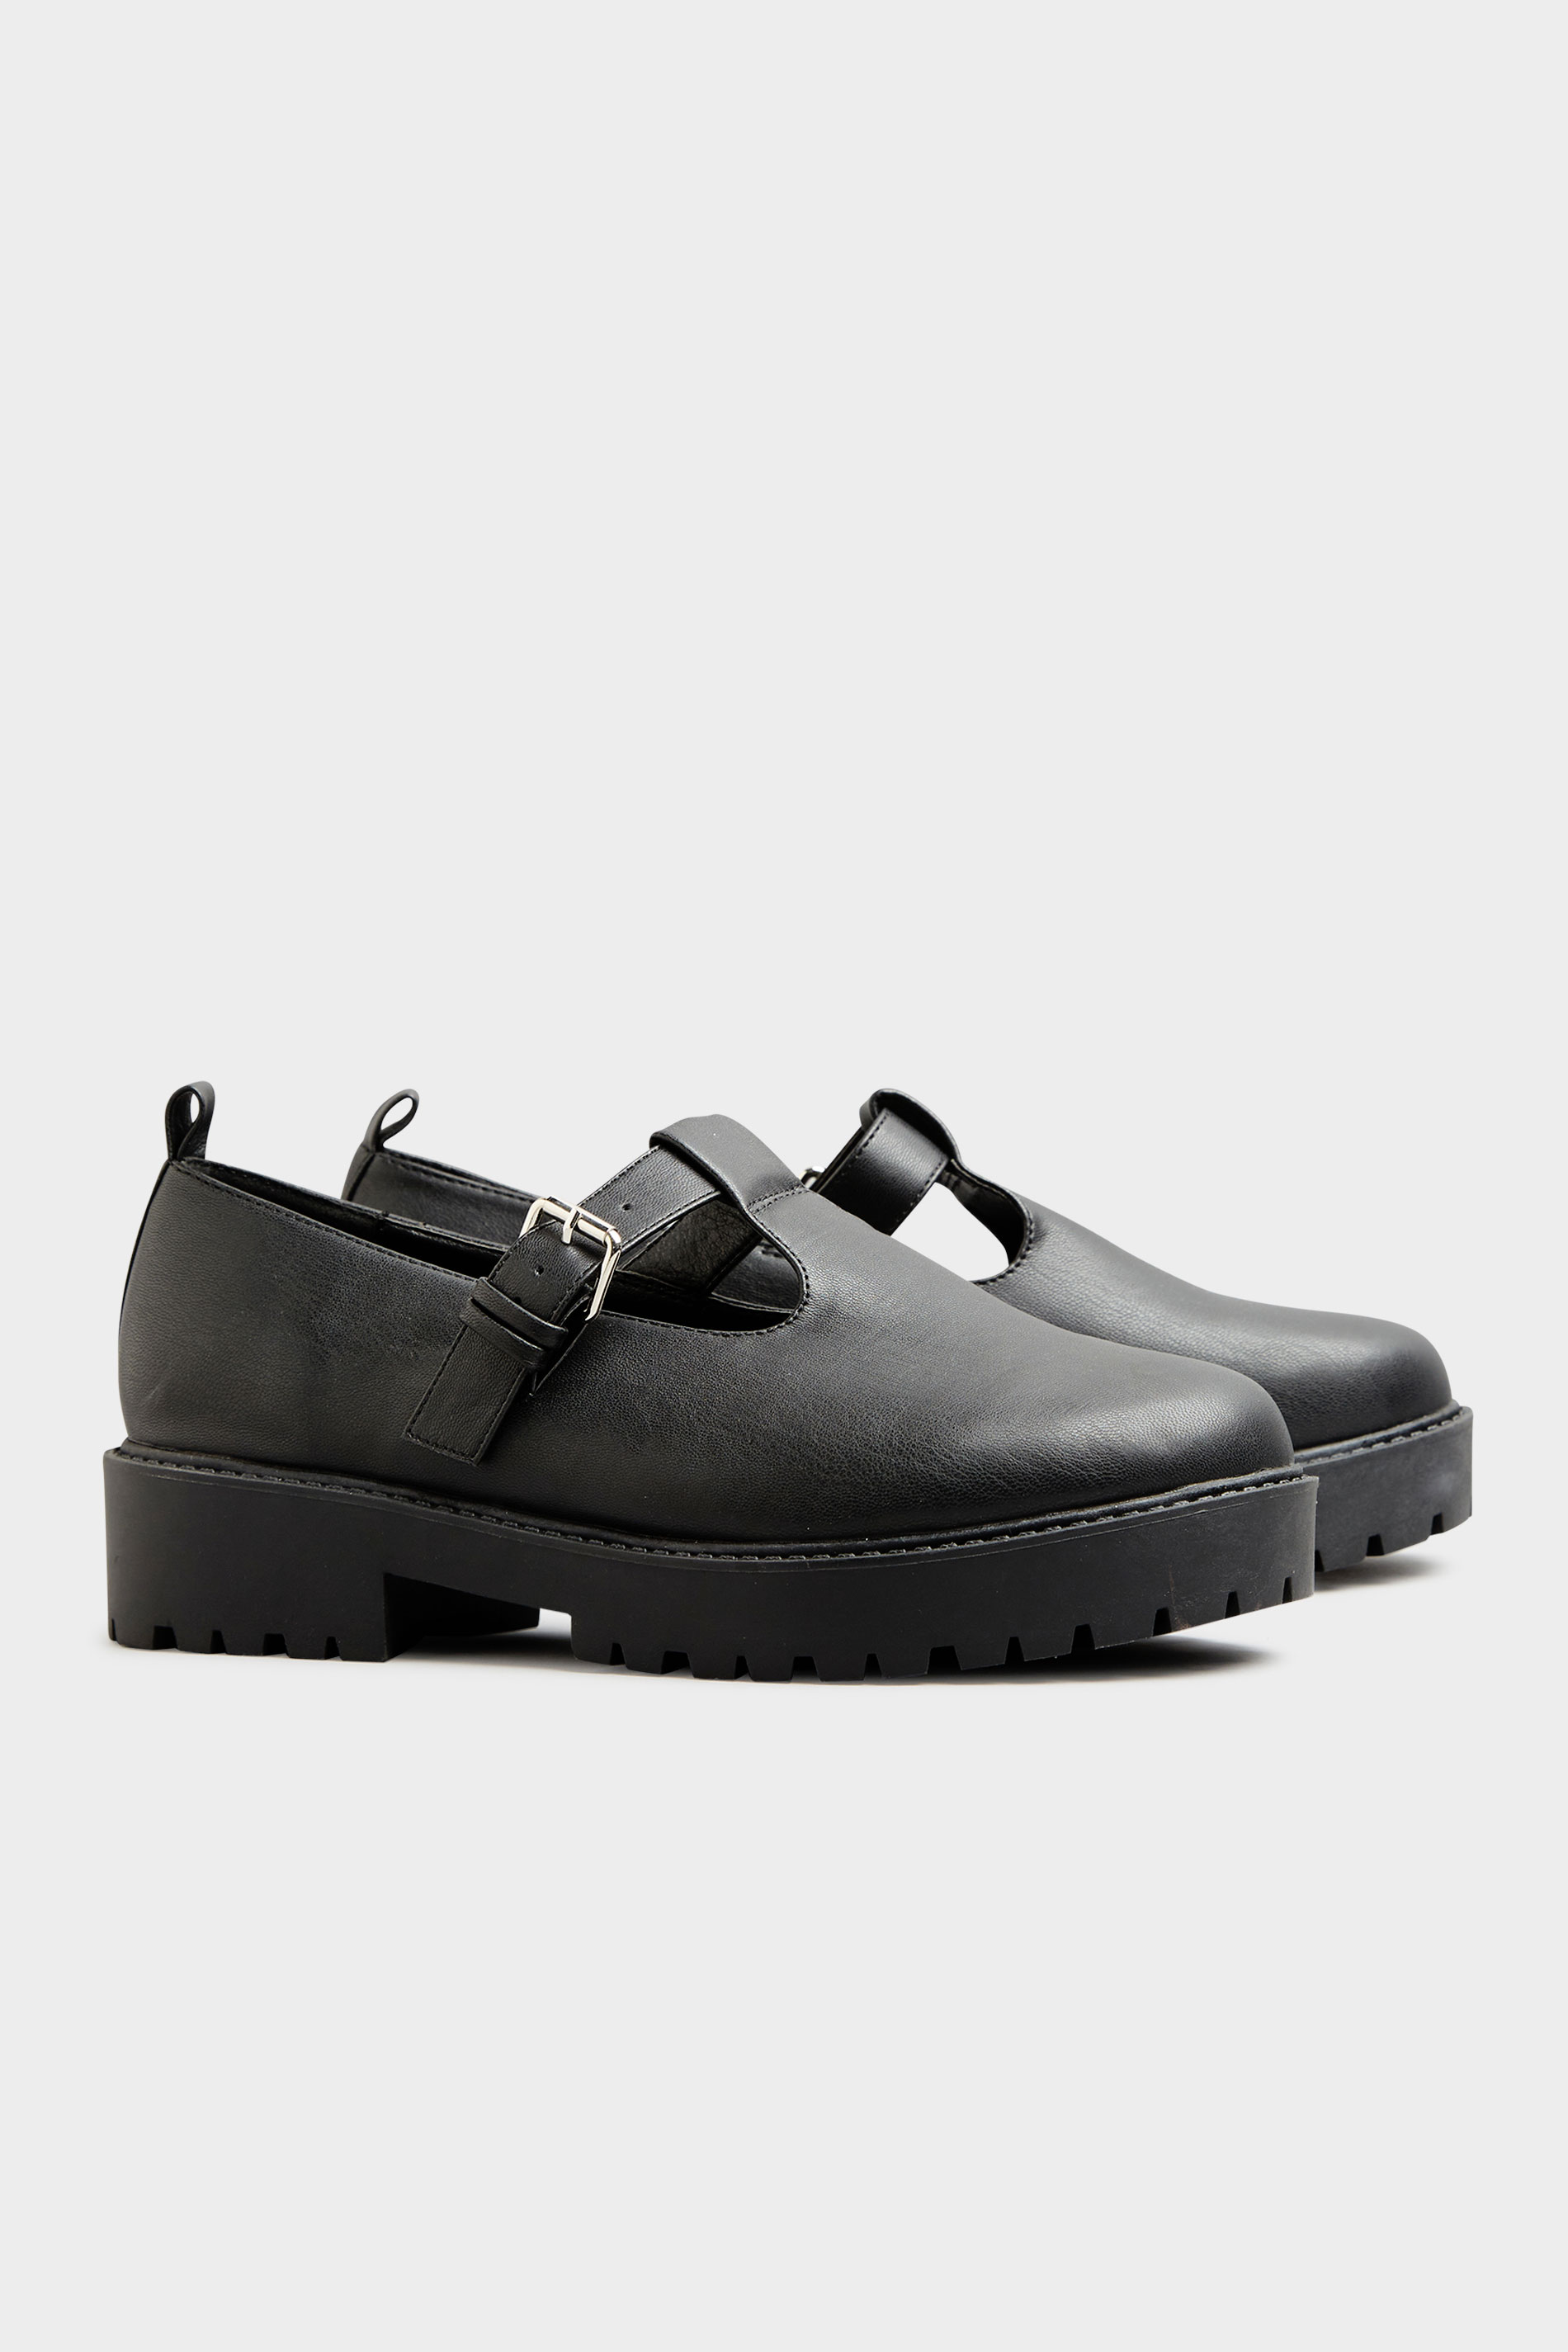 LIMITED COLLECTION Black Mary Janes In Extra Wide EEE Fit_C.jpg